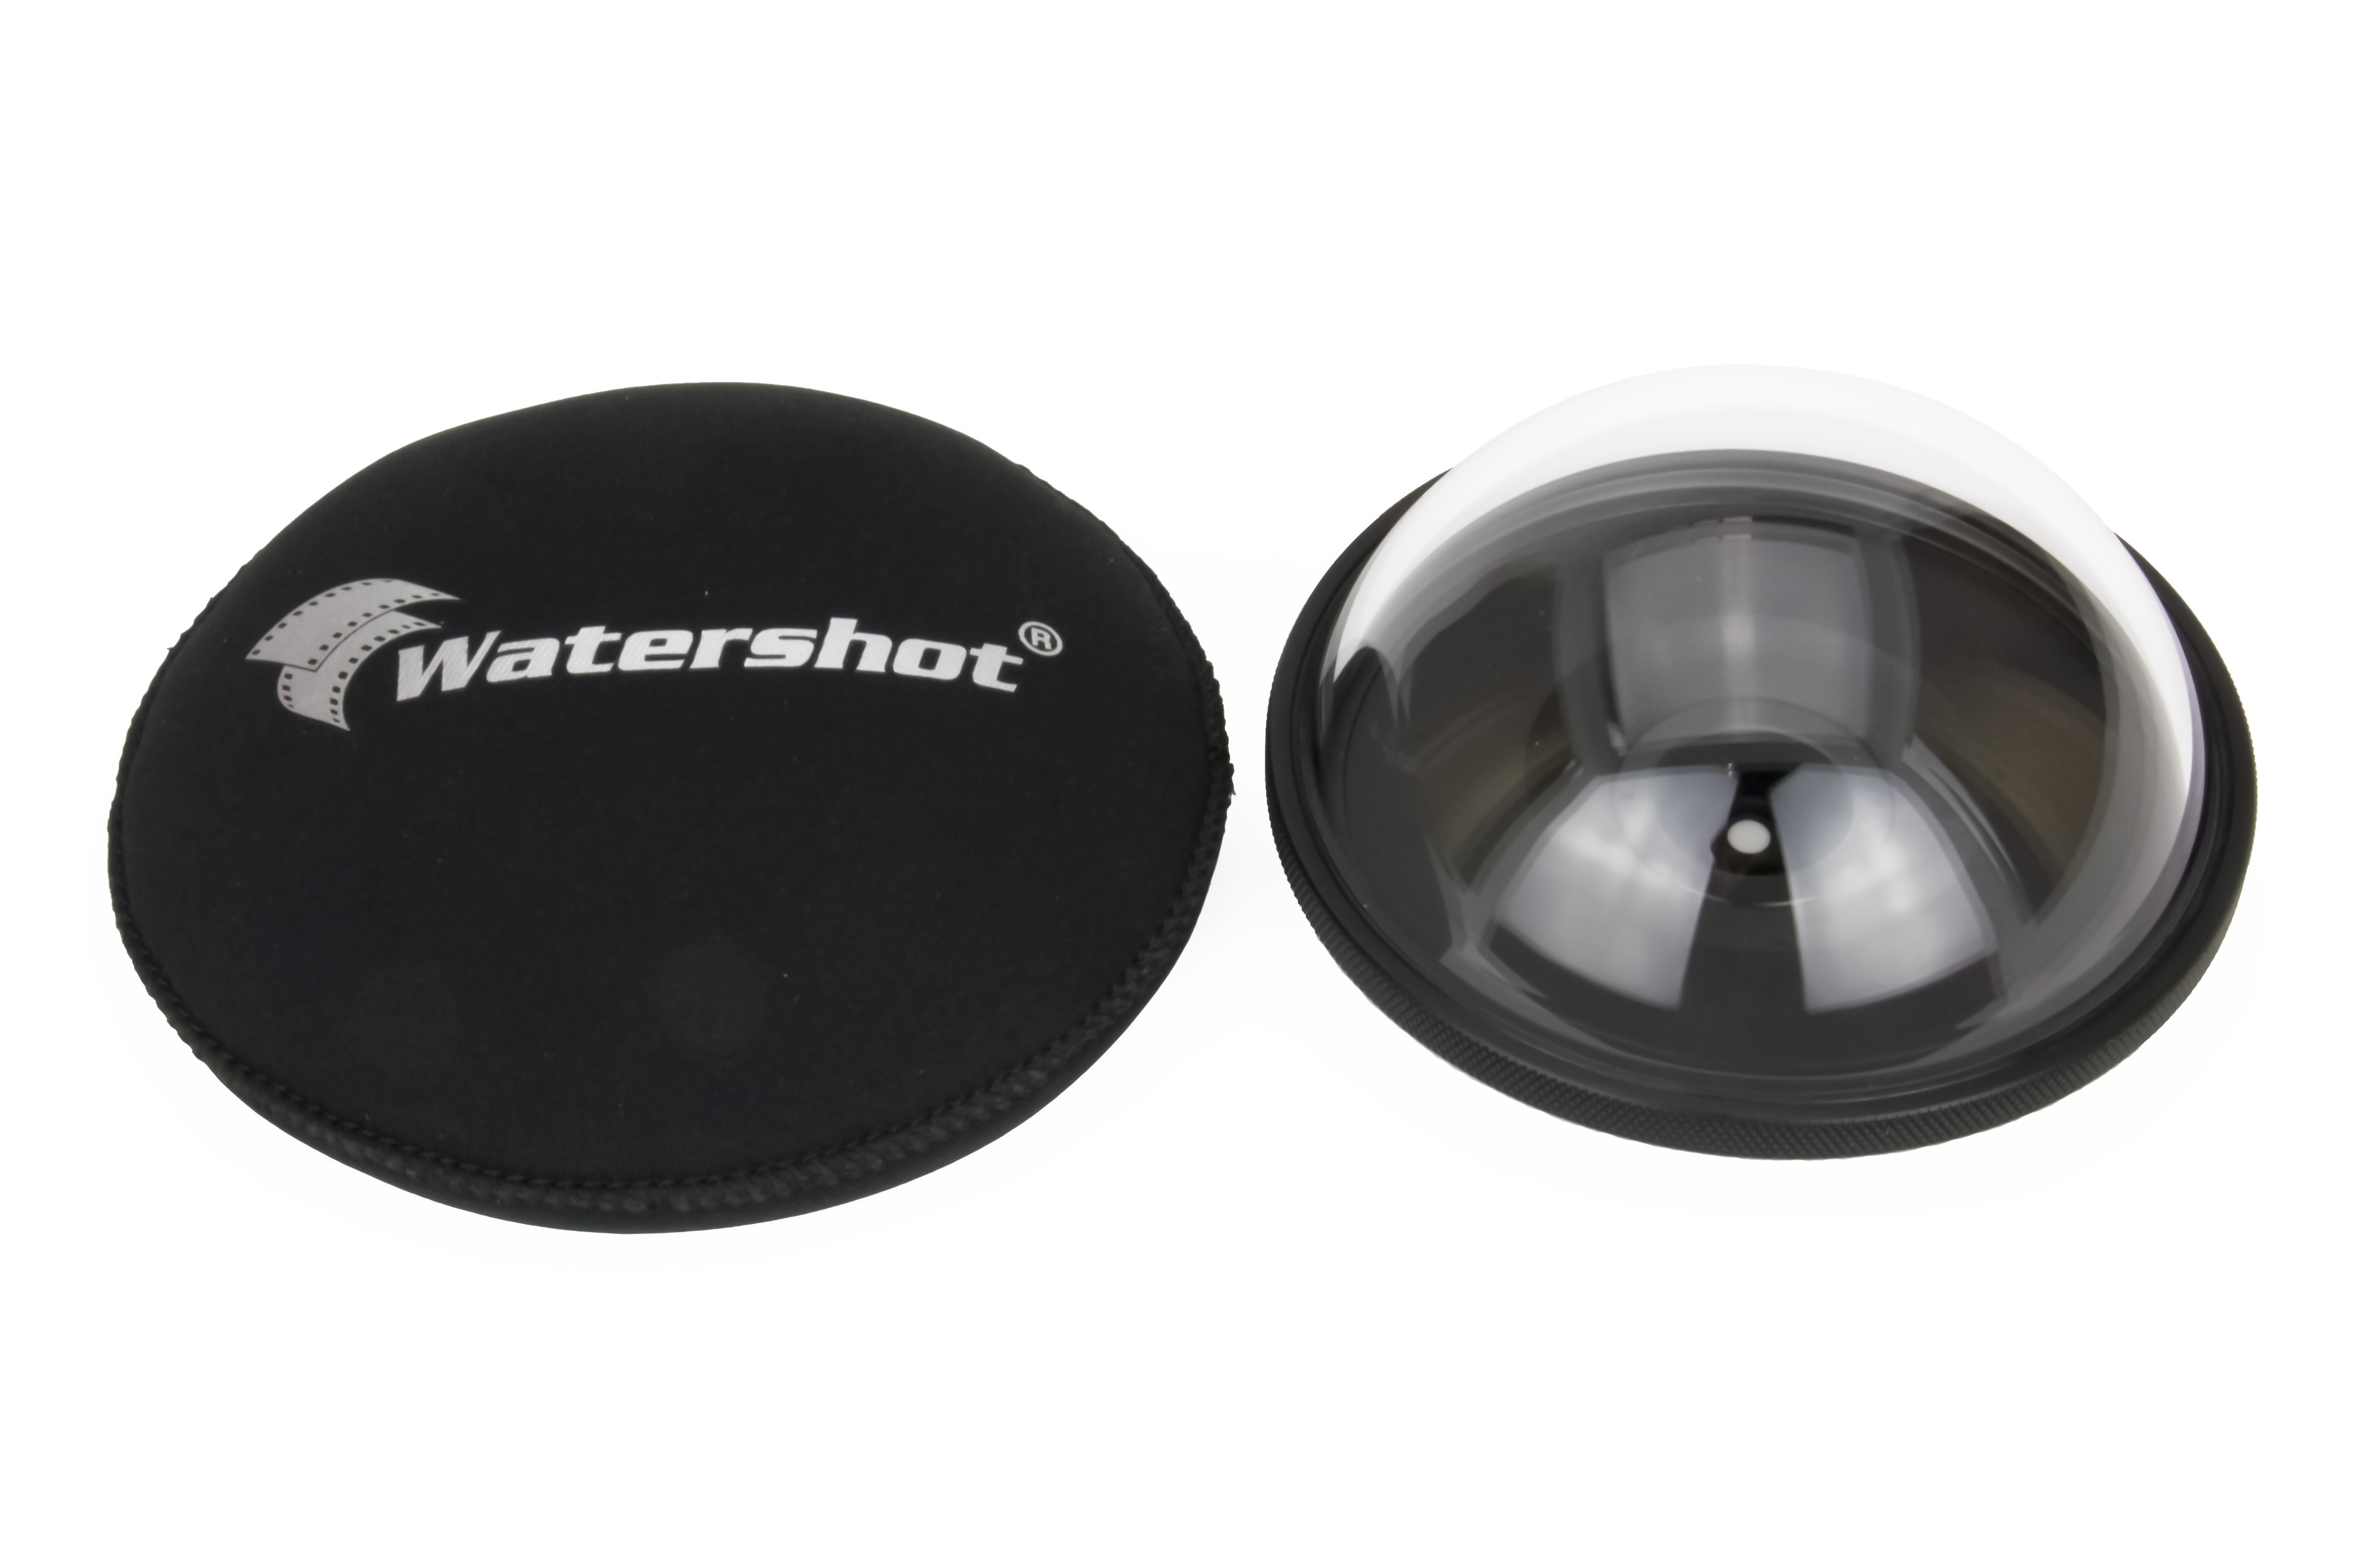 The Watershot Superdome atatches to their Watrshot pro line of housings for smart phones to allow over/under style shots.